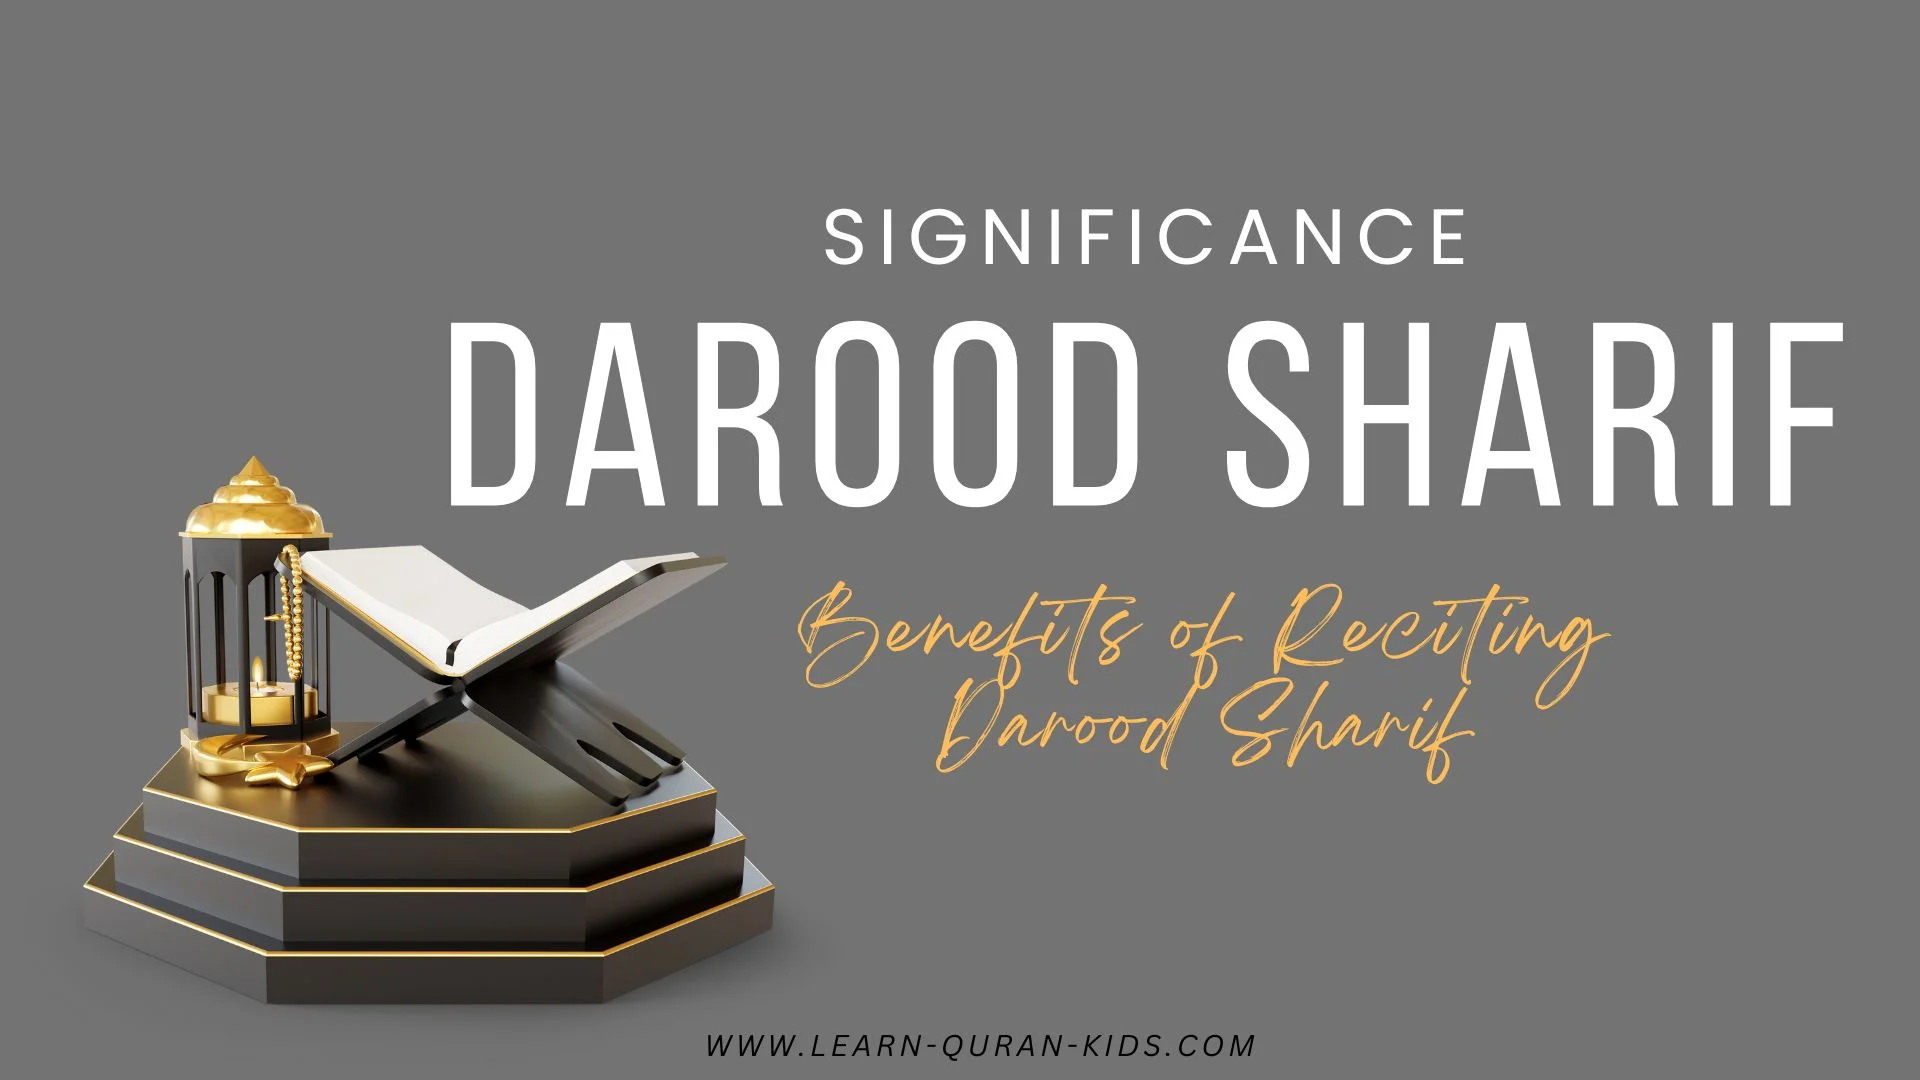 Darood Sharif Meaning - Benefits and Significance of Durood Sharif